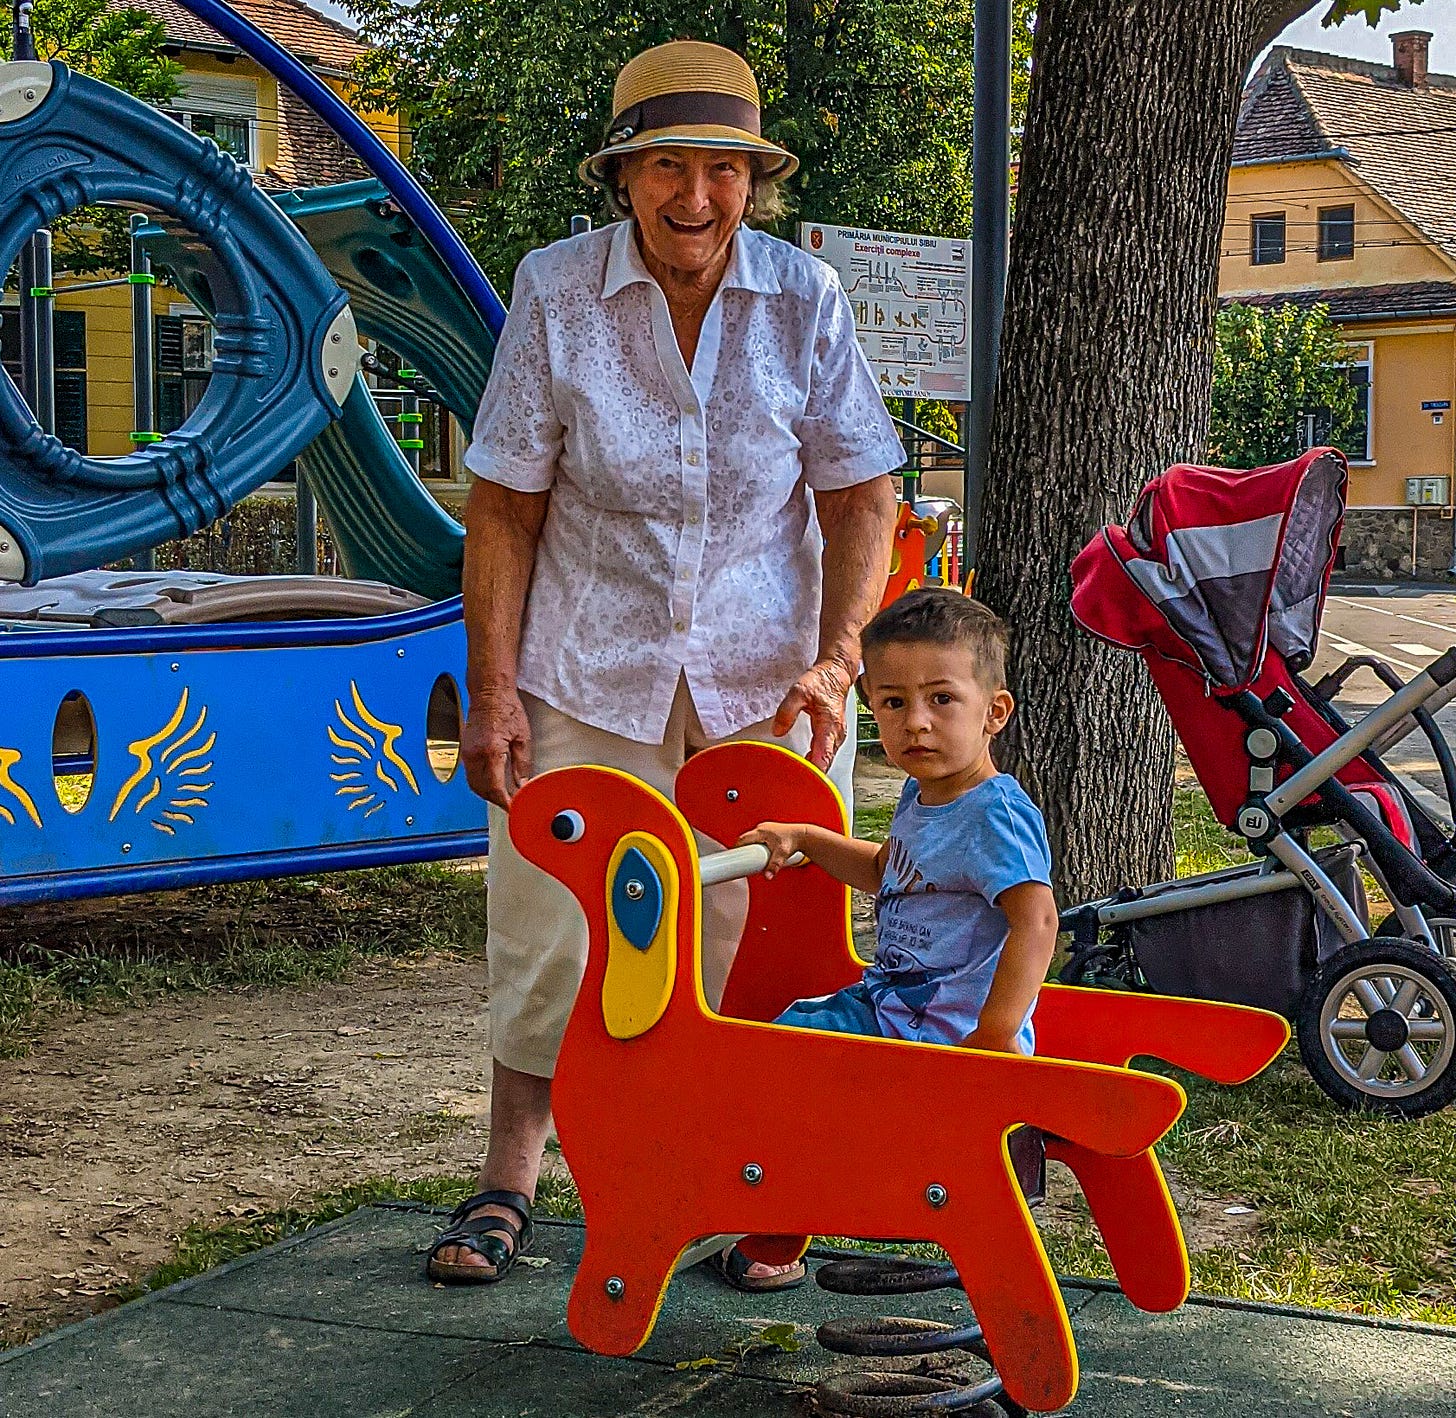 A smiling grandmother stands with her three-year-old grandson sitting on a rocking chair.